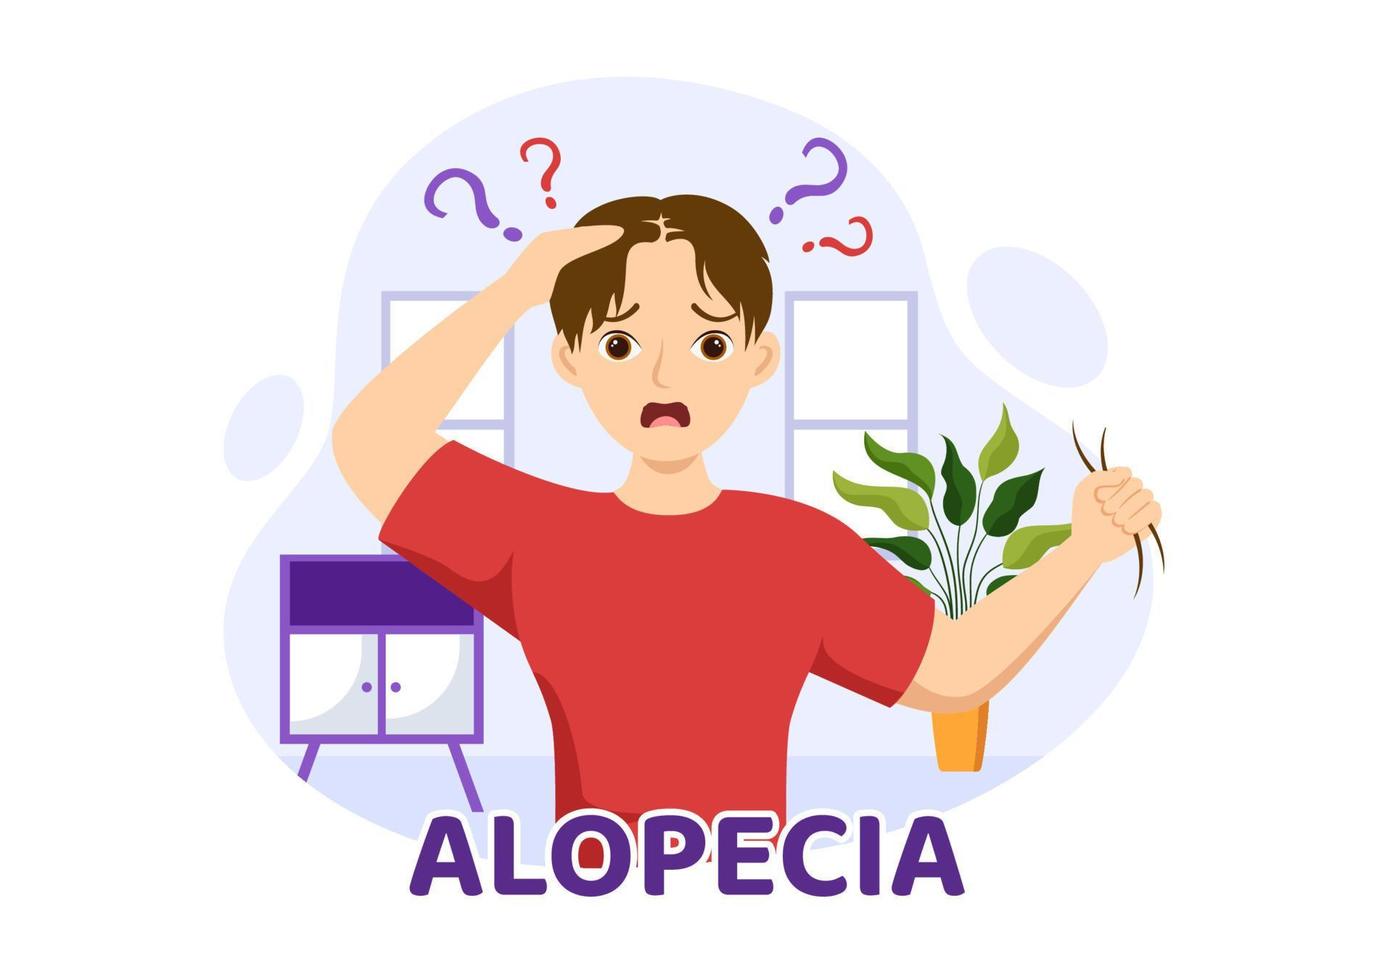 Alopecia Illustration with Hair Loss Autoimmune Medical Disease and Baldness in Healthcare Flat Cartoon Hand Drawn Banner or Landing Page Templates vector